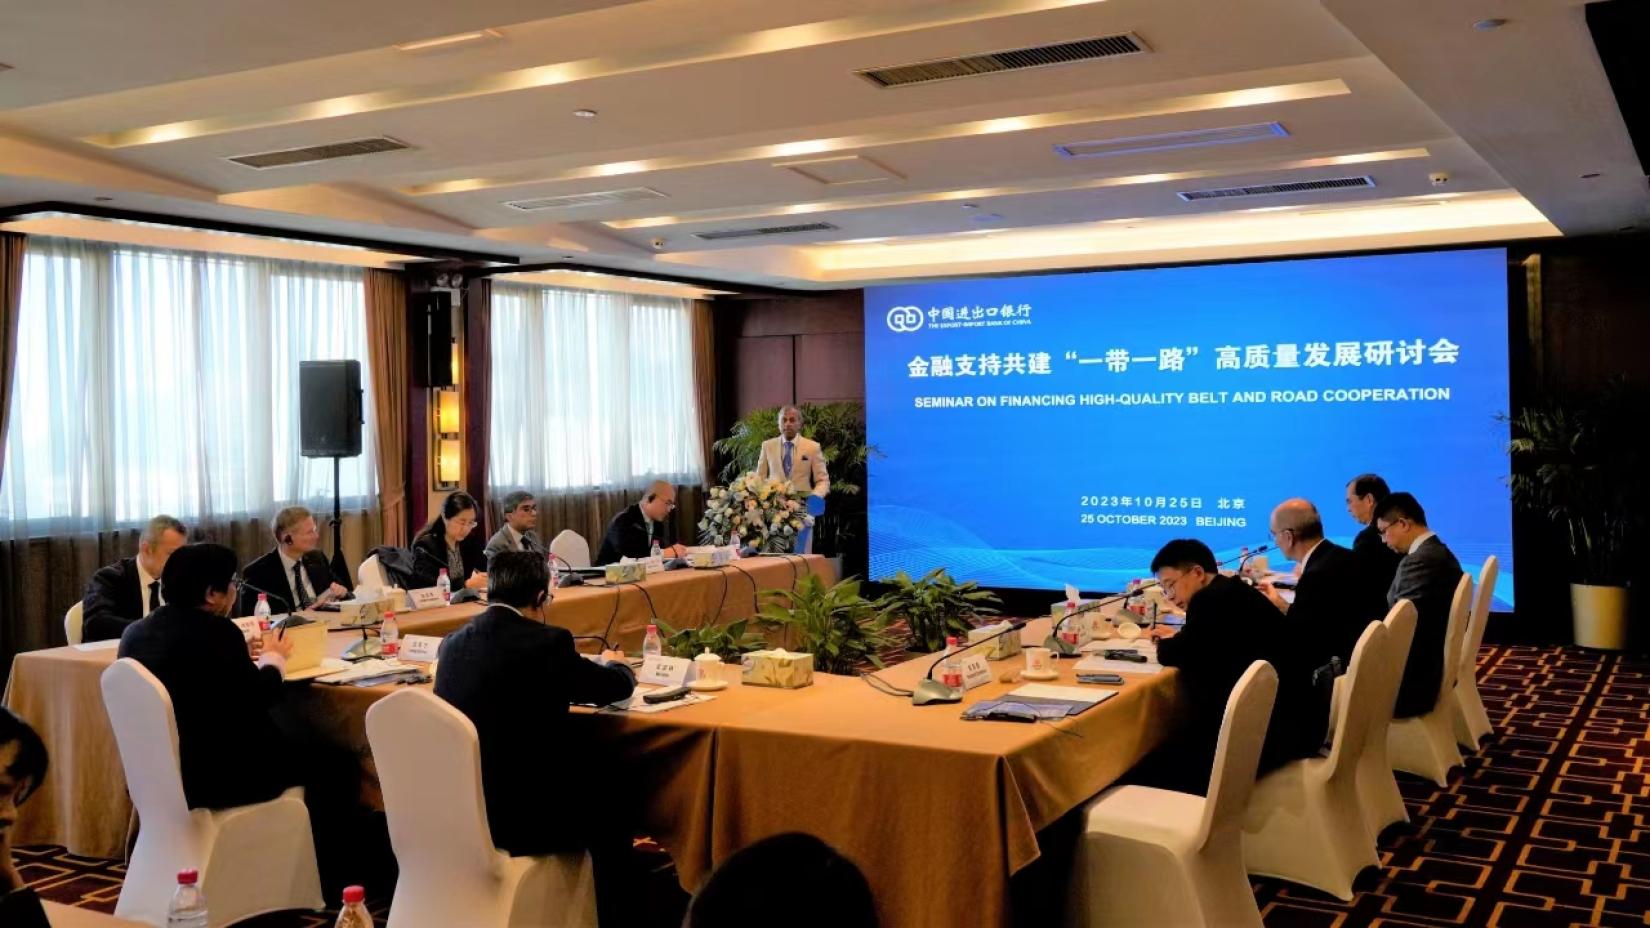 UN Resident Coordinator in China Siddharth Chatterjee at the Seminar on Financing High-Quality Belt and Road Cooperation.